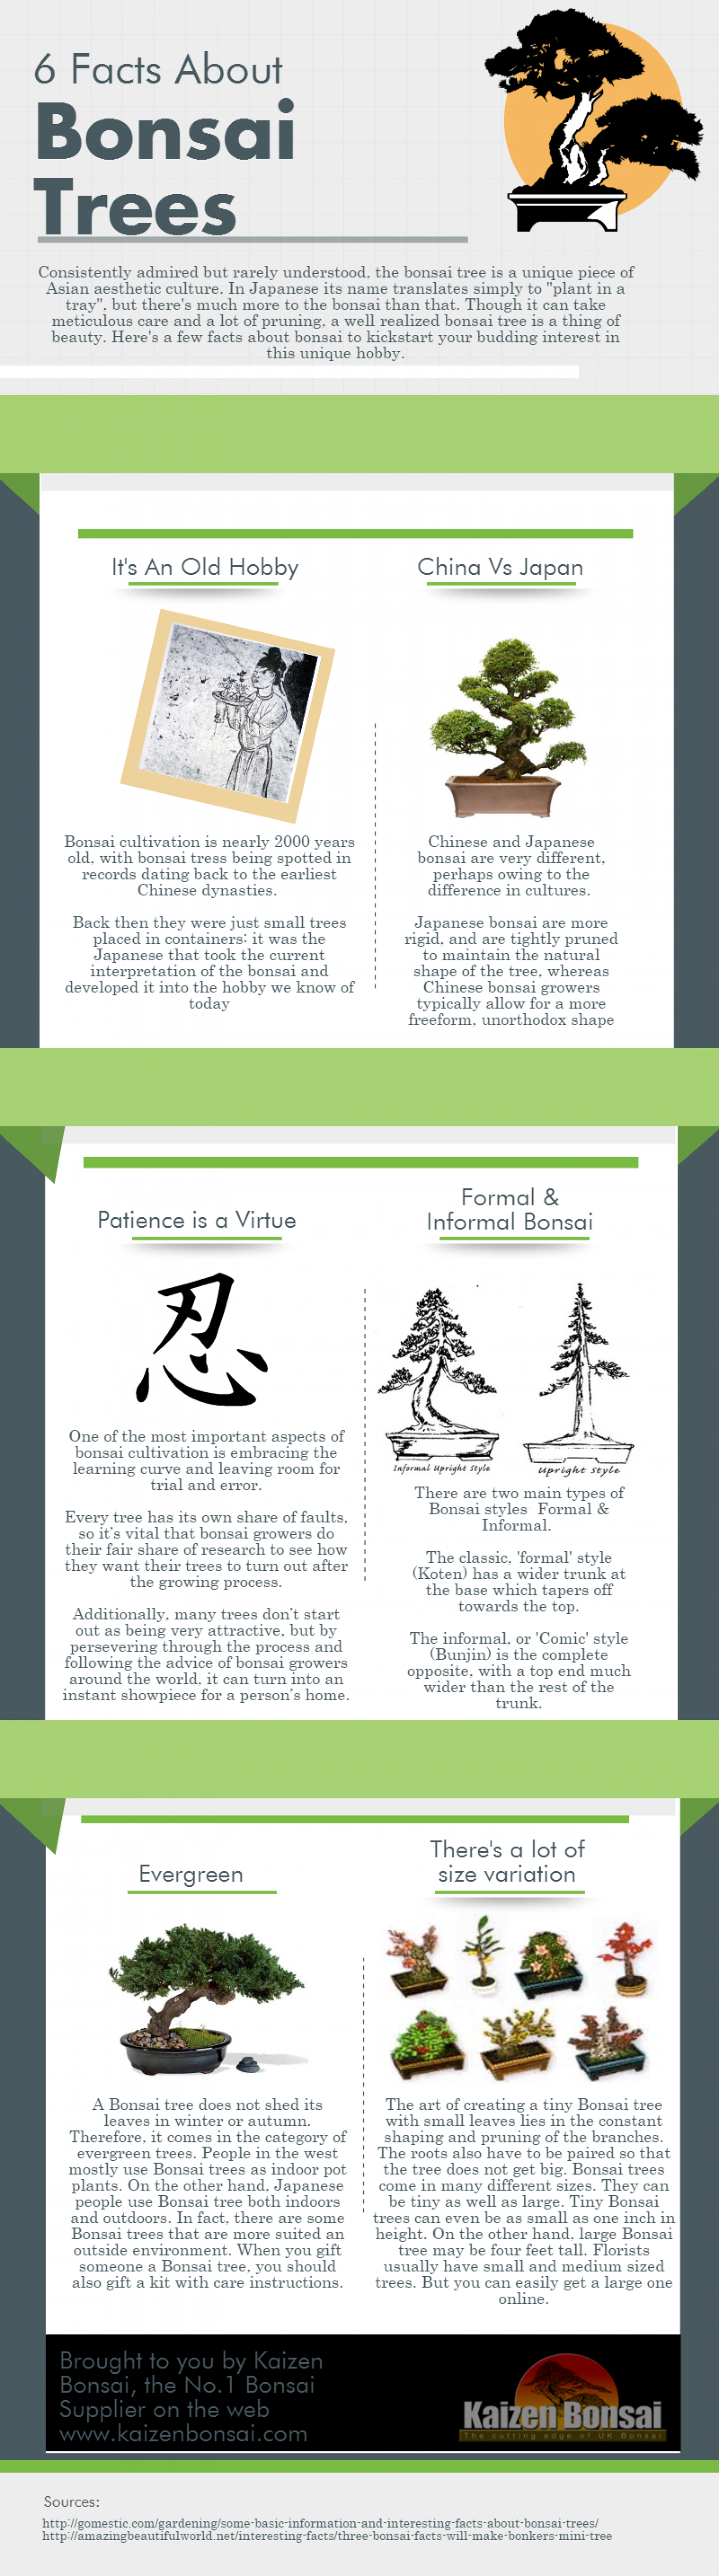 6 Interesting Facts About Bonsai Trees Infographic